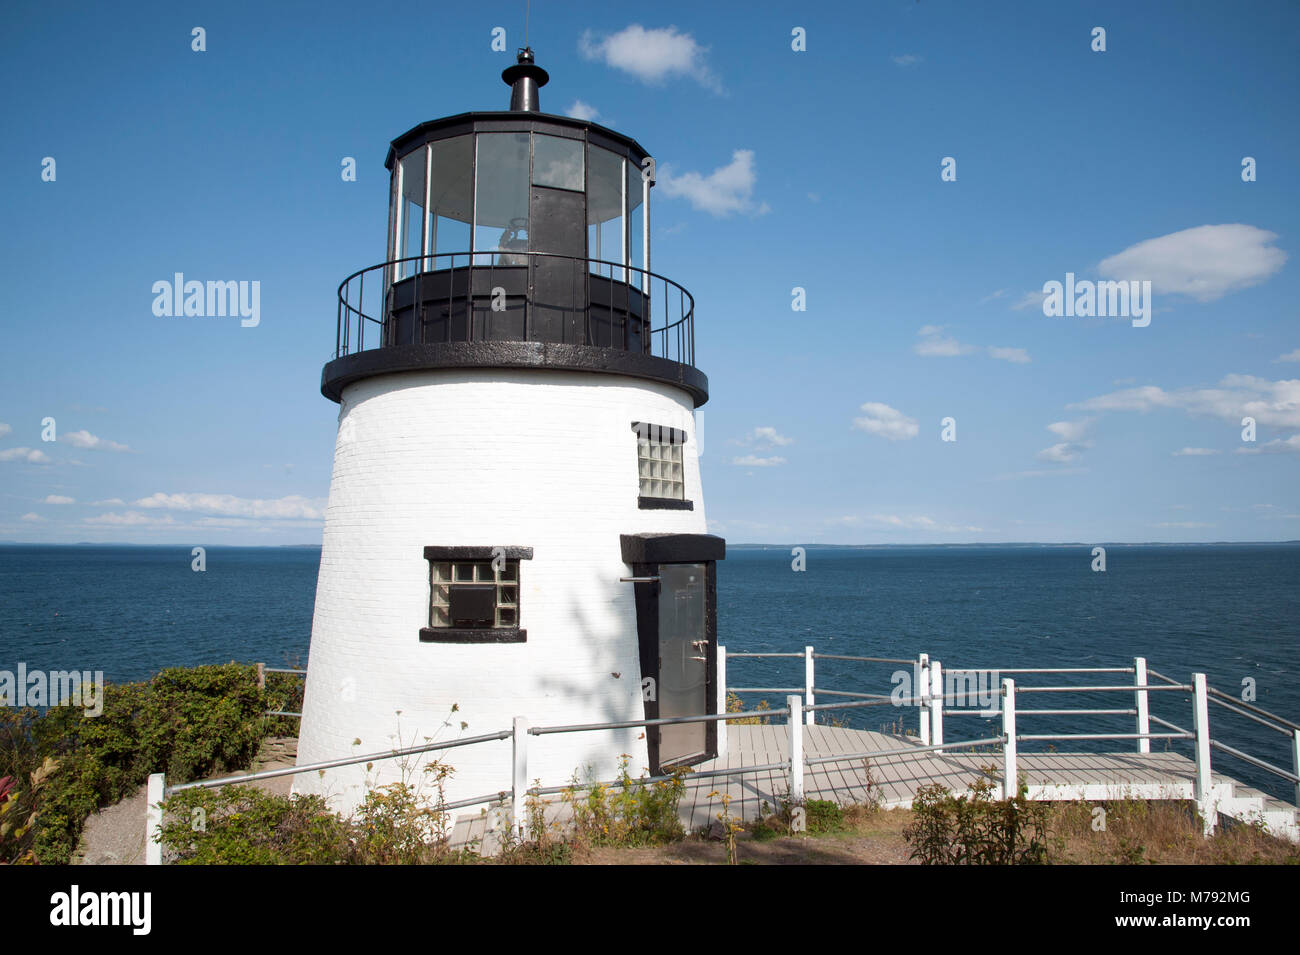 Owls Head lighthouse sits atop a 100 foot cliff over the ocean below, on a summer day in Maine. Stock Photo